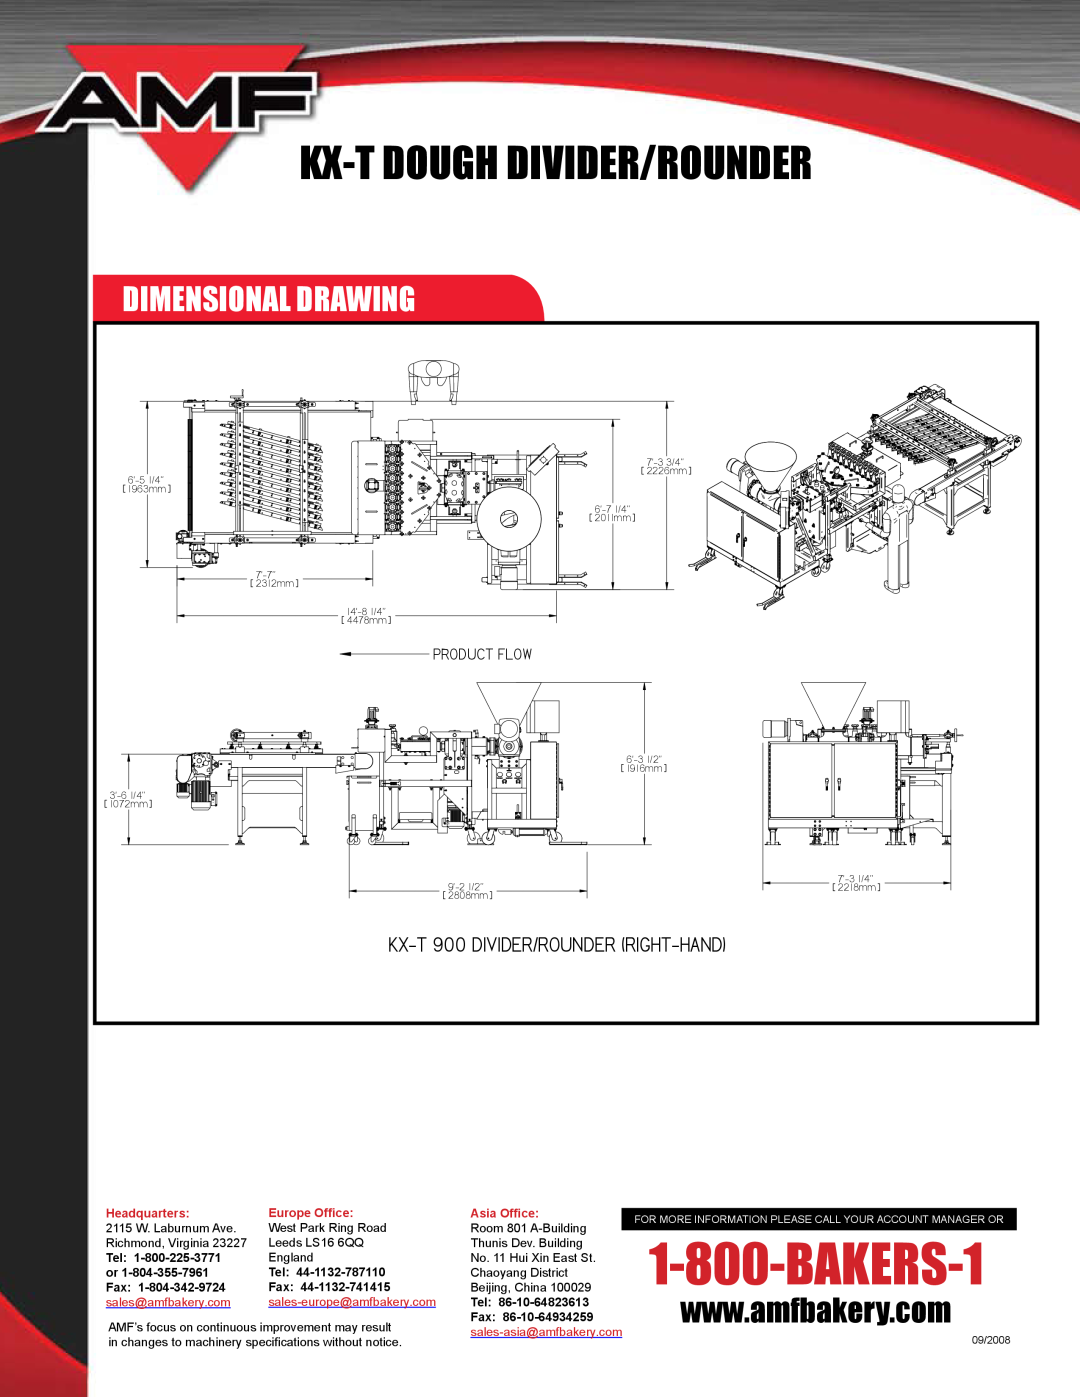 AMF KX-T Dimensional Drawing, Kx-Tdough Divider/Rounder, , , Headquarters 